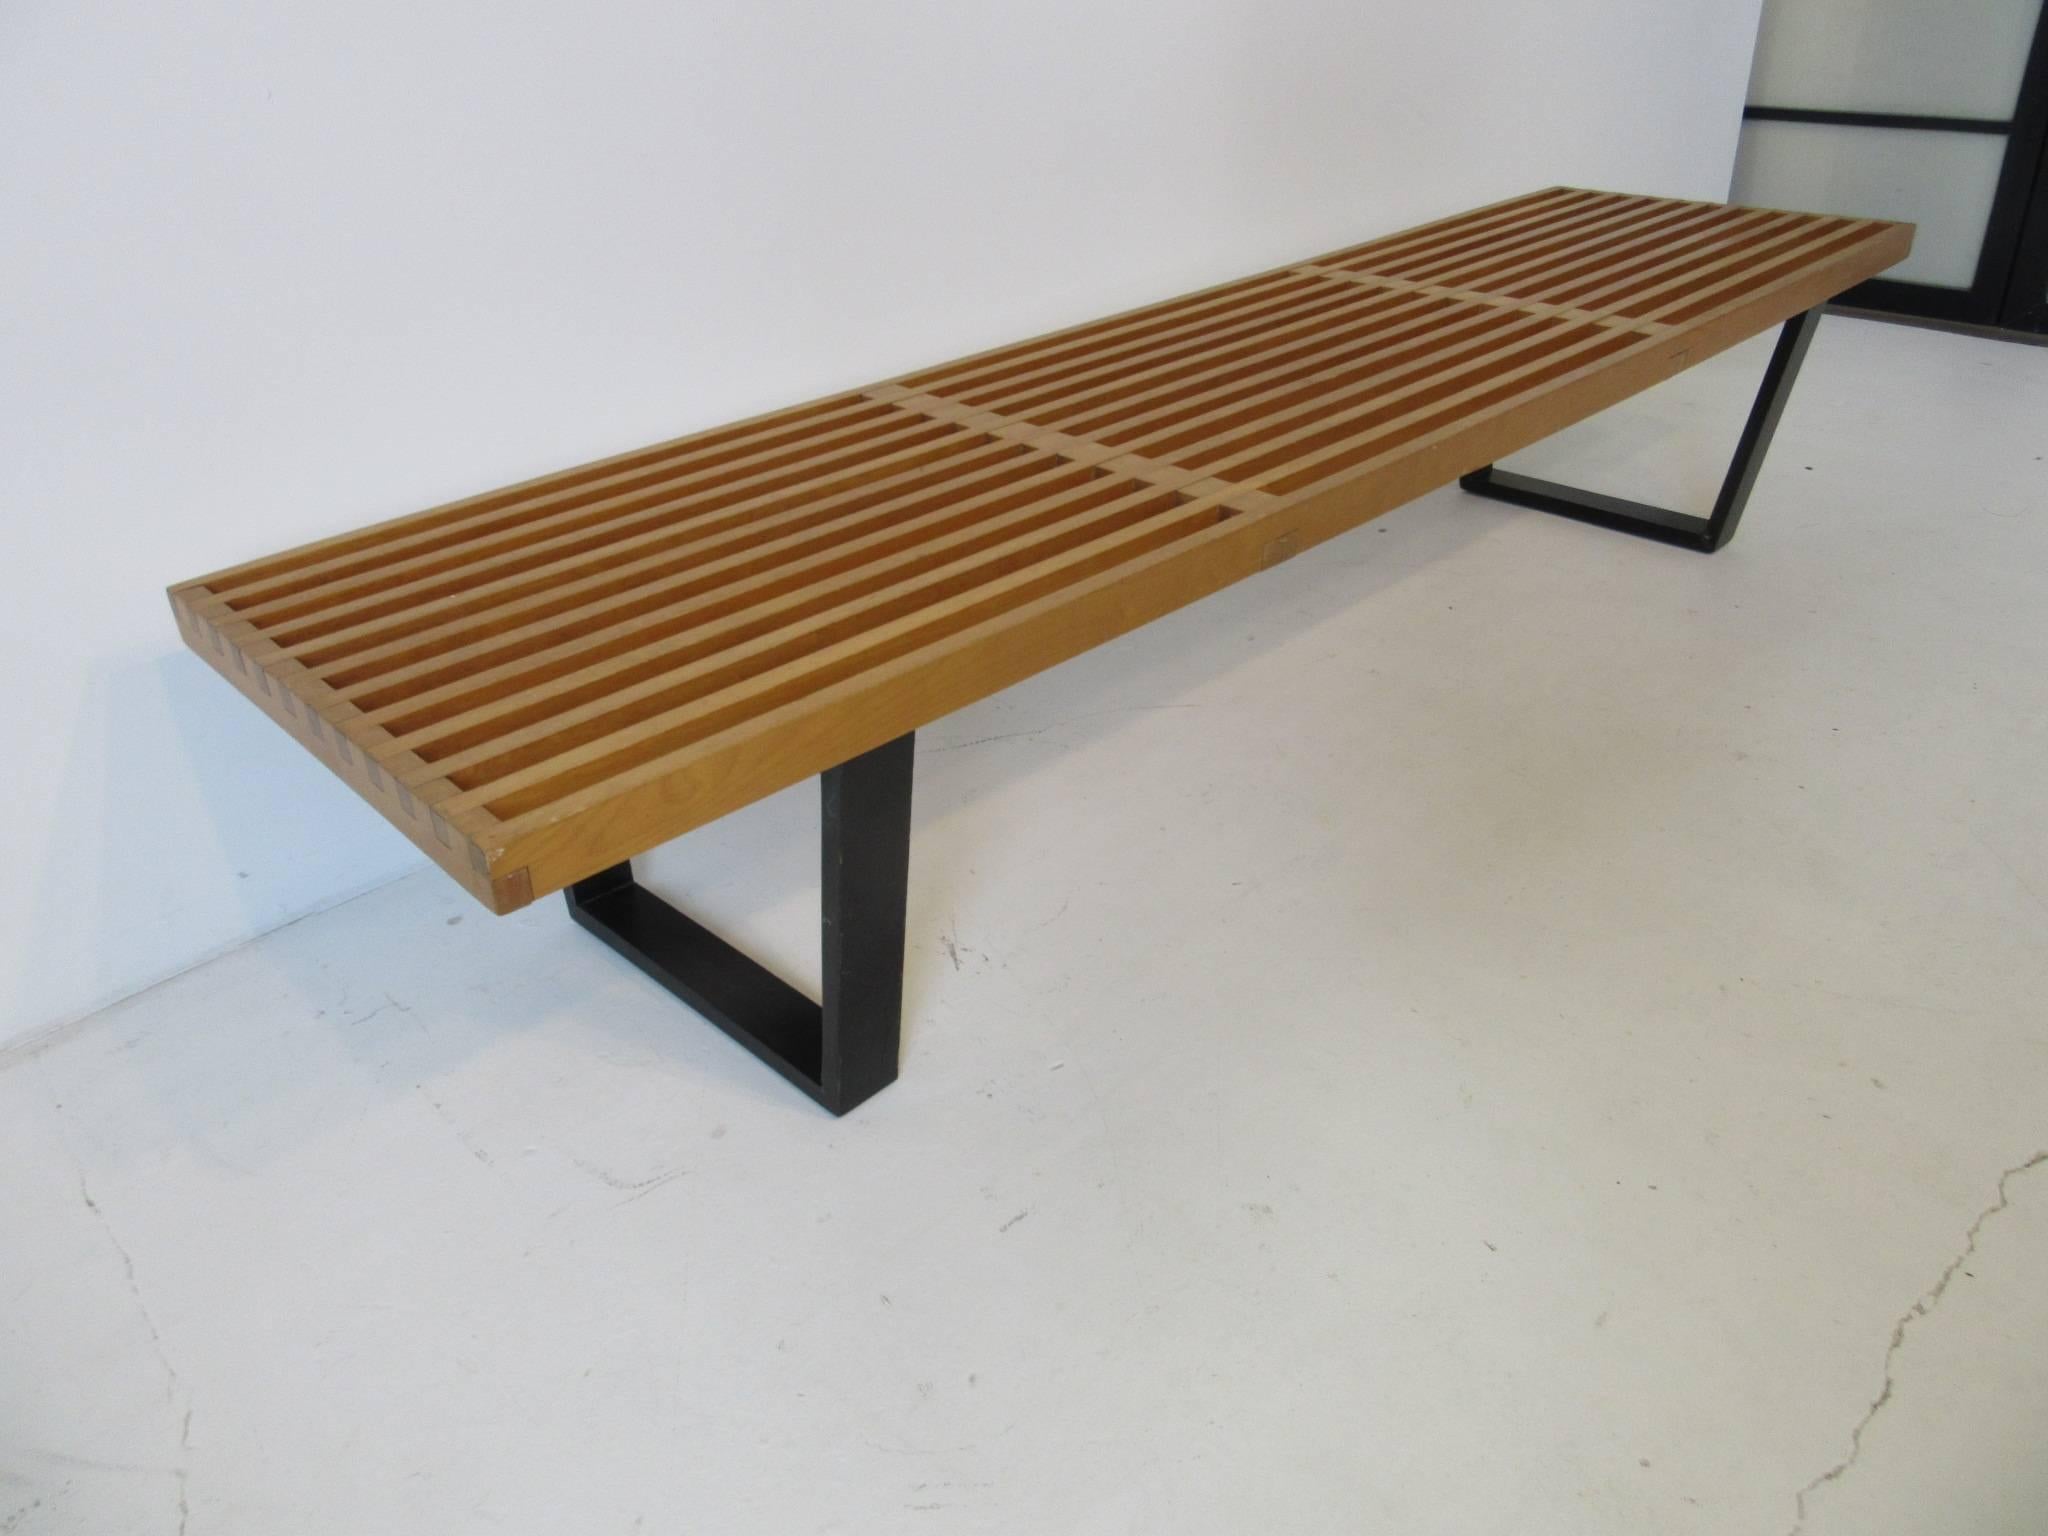 A vintage wooden Nelson platform slat bench or coffee table with satin black legs, perfect for that entrance way, living space or at the foot of the bed. Manufactured by the Herman Miller furniture company.